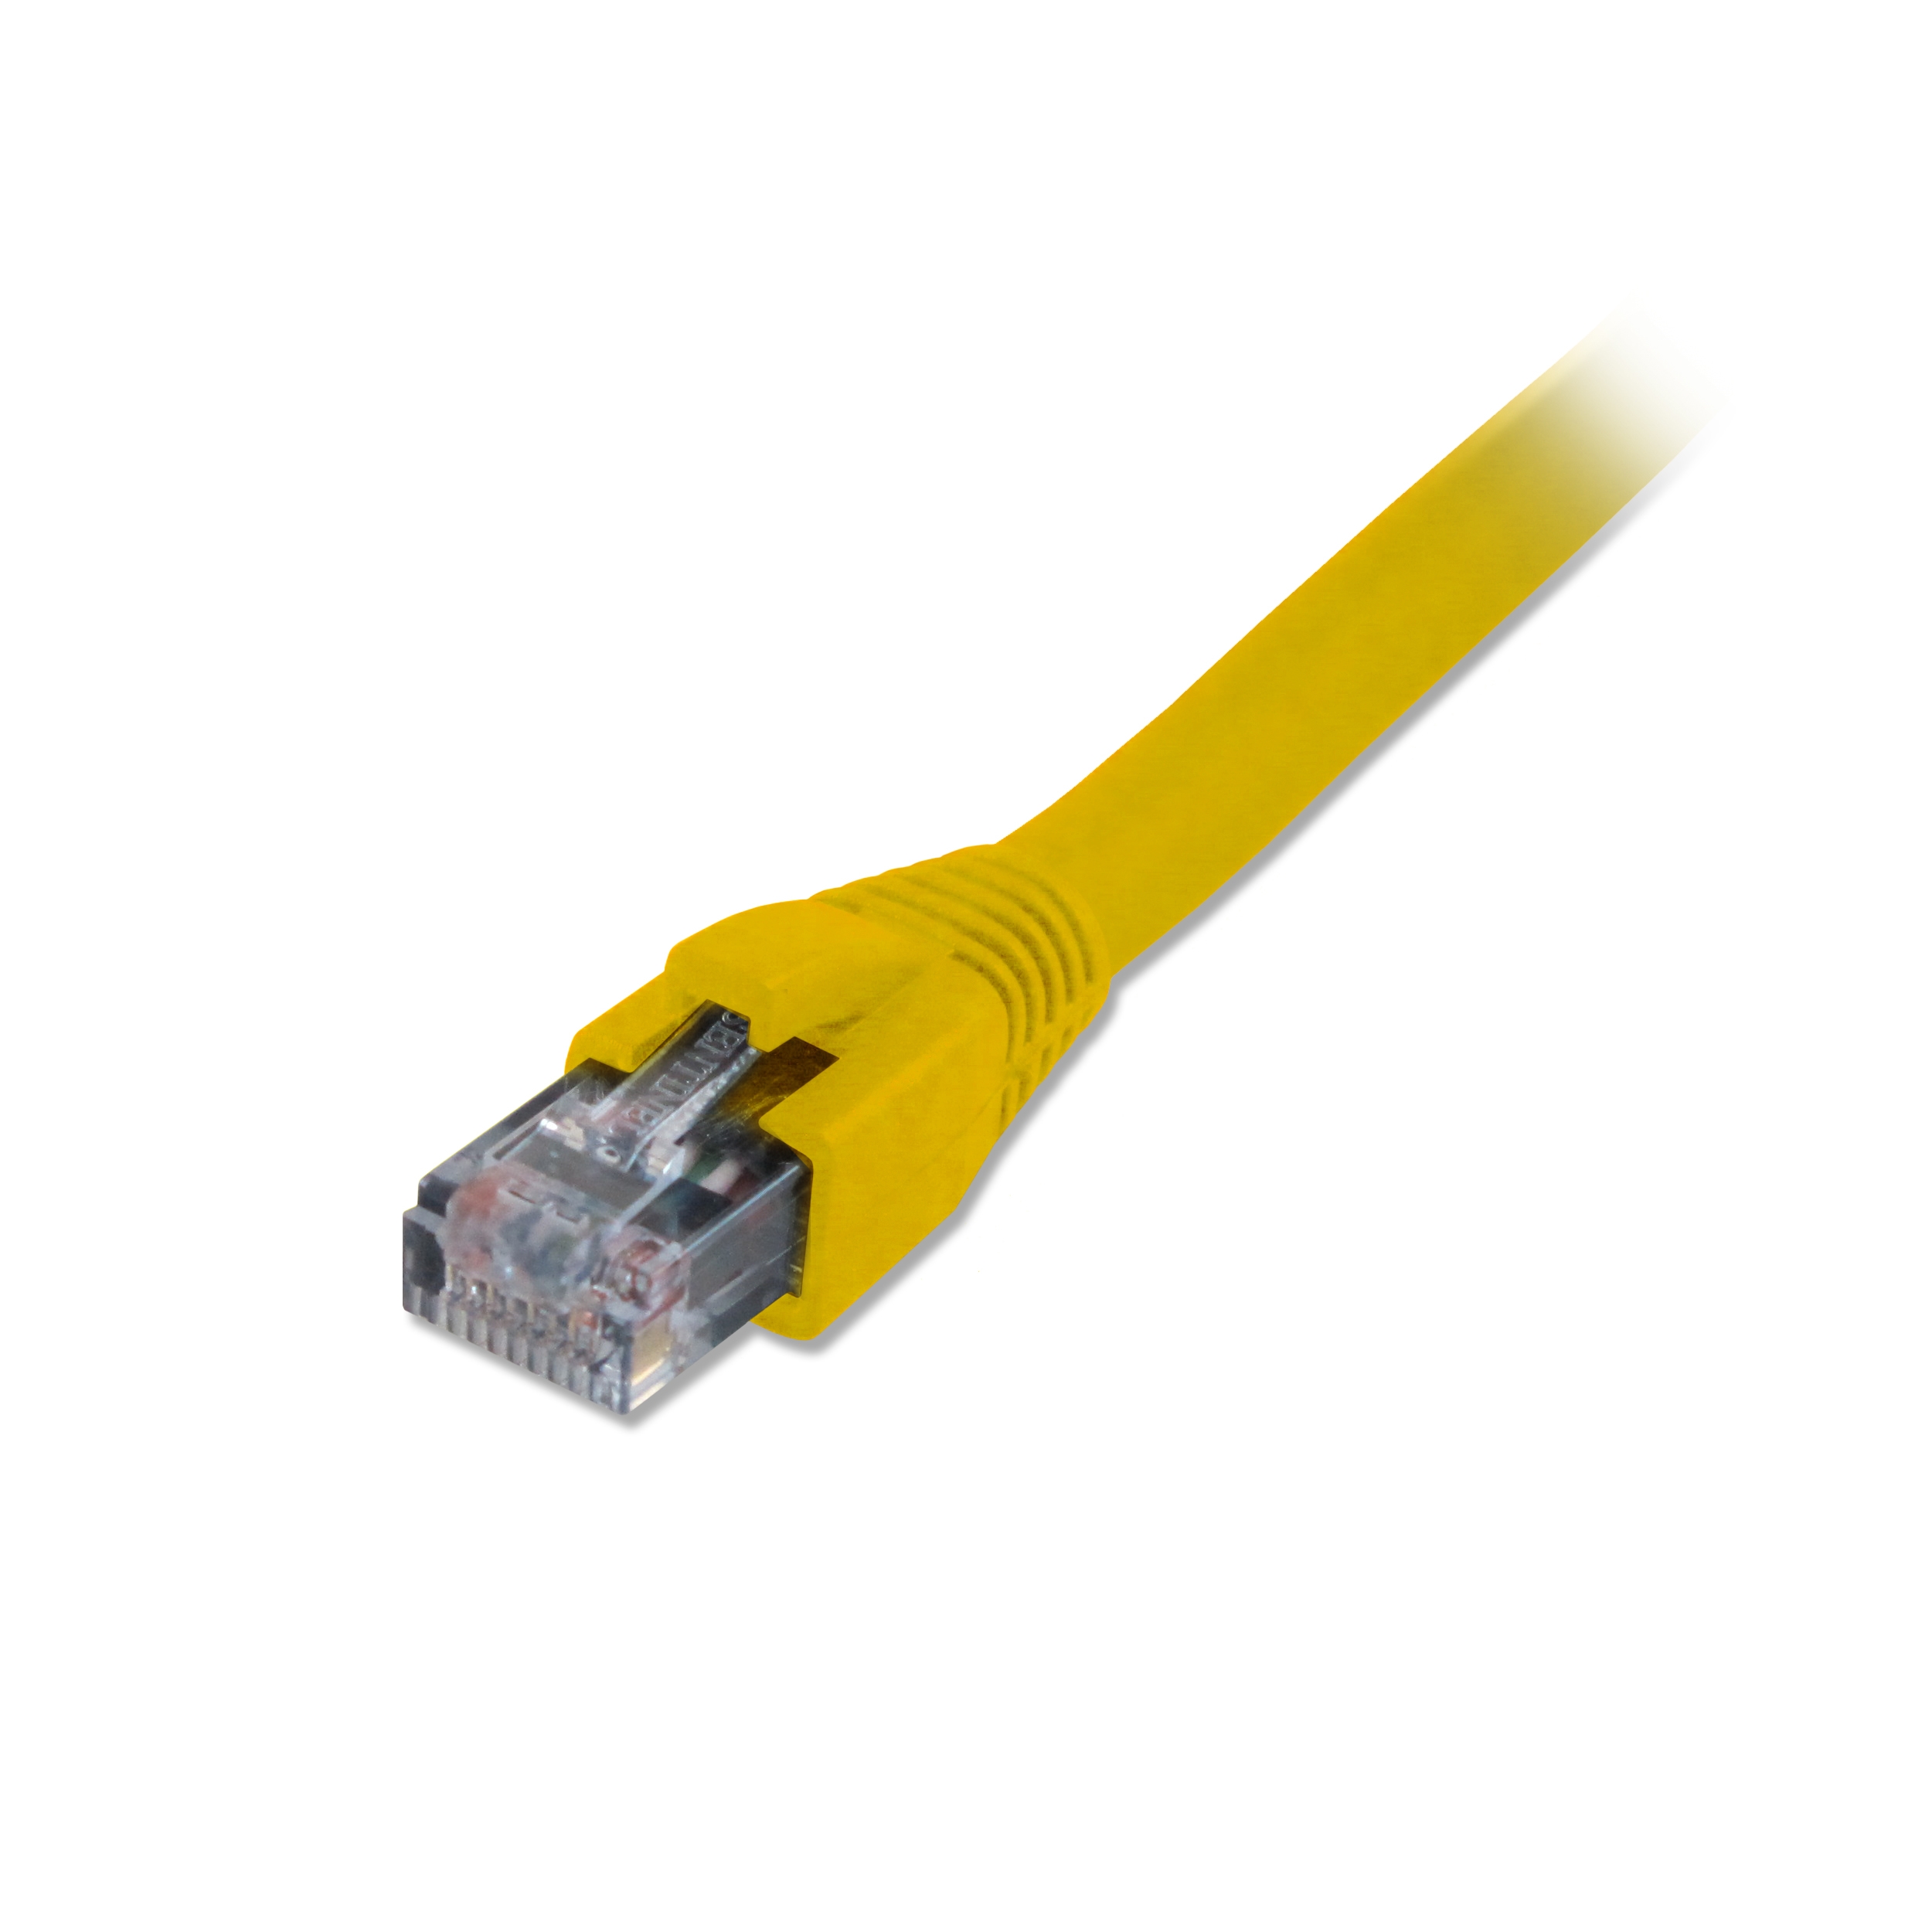 Comprehensive CAT5-350-5YLW Cat5e 350 Mhz Snagless Patch Cable 5ft Yellow